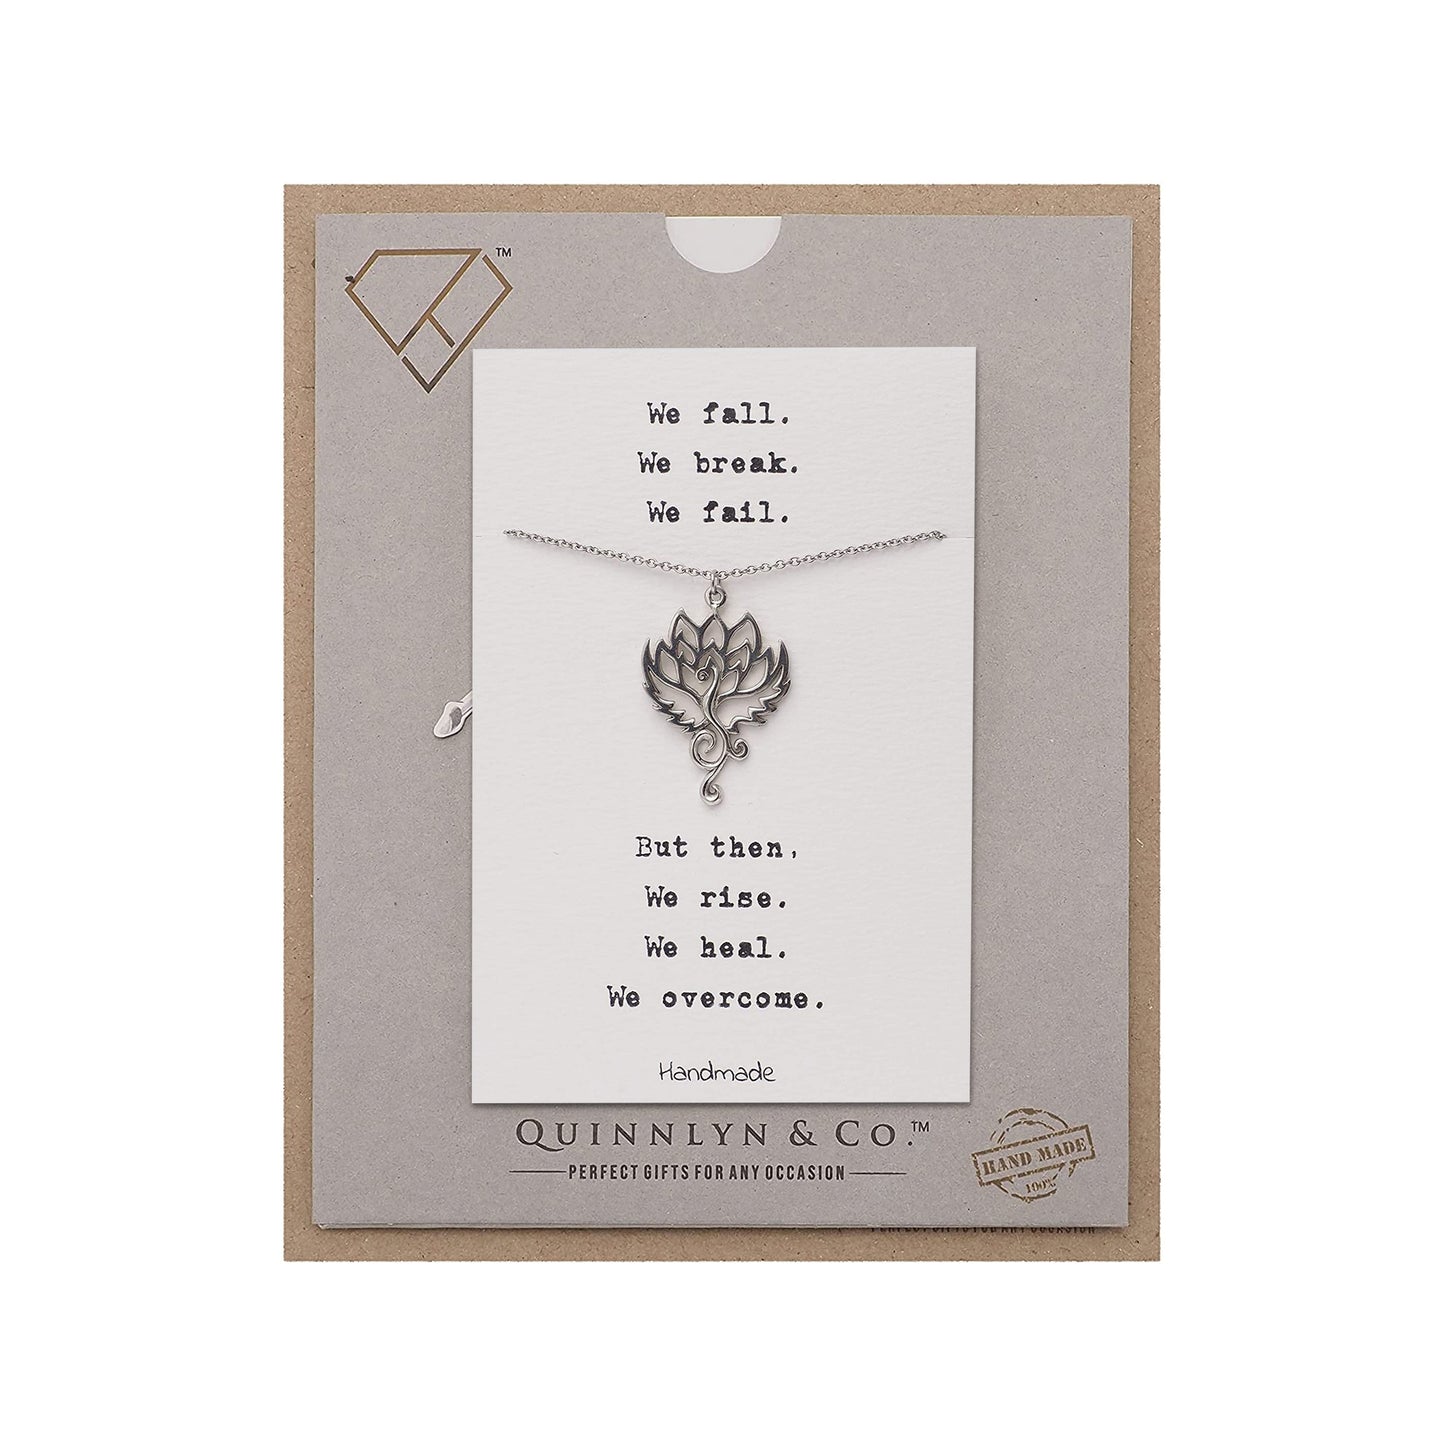 Quinnlyn & Co. Phoenix Flower Pendant Necklace, Handmade Gifts for Women with Inspirational Quote on Greeting Card